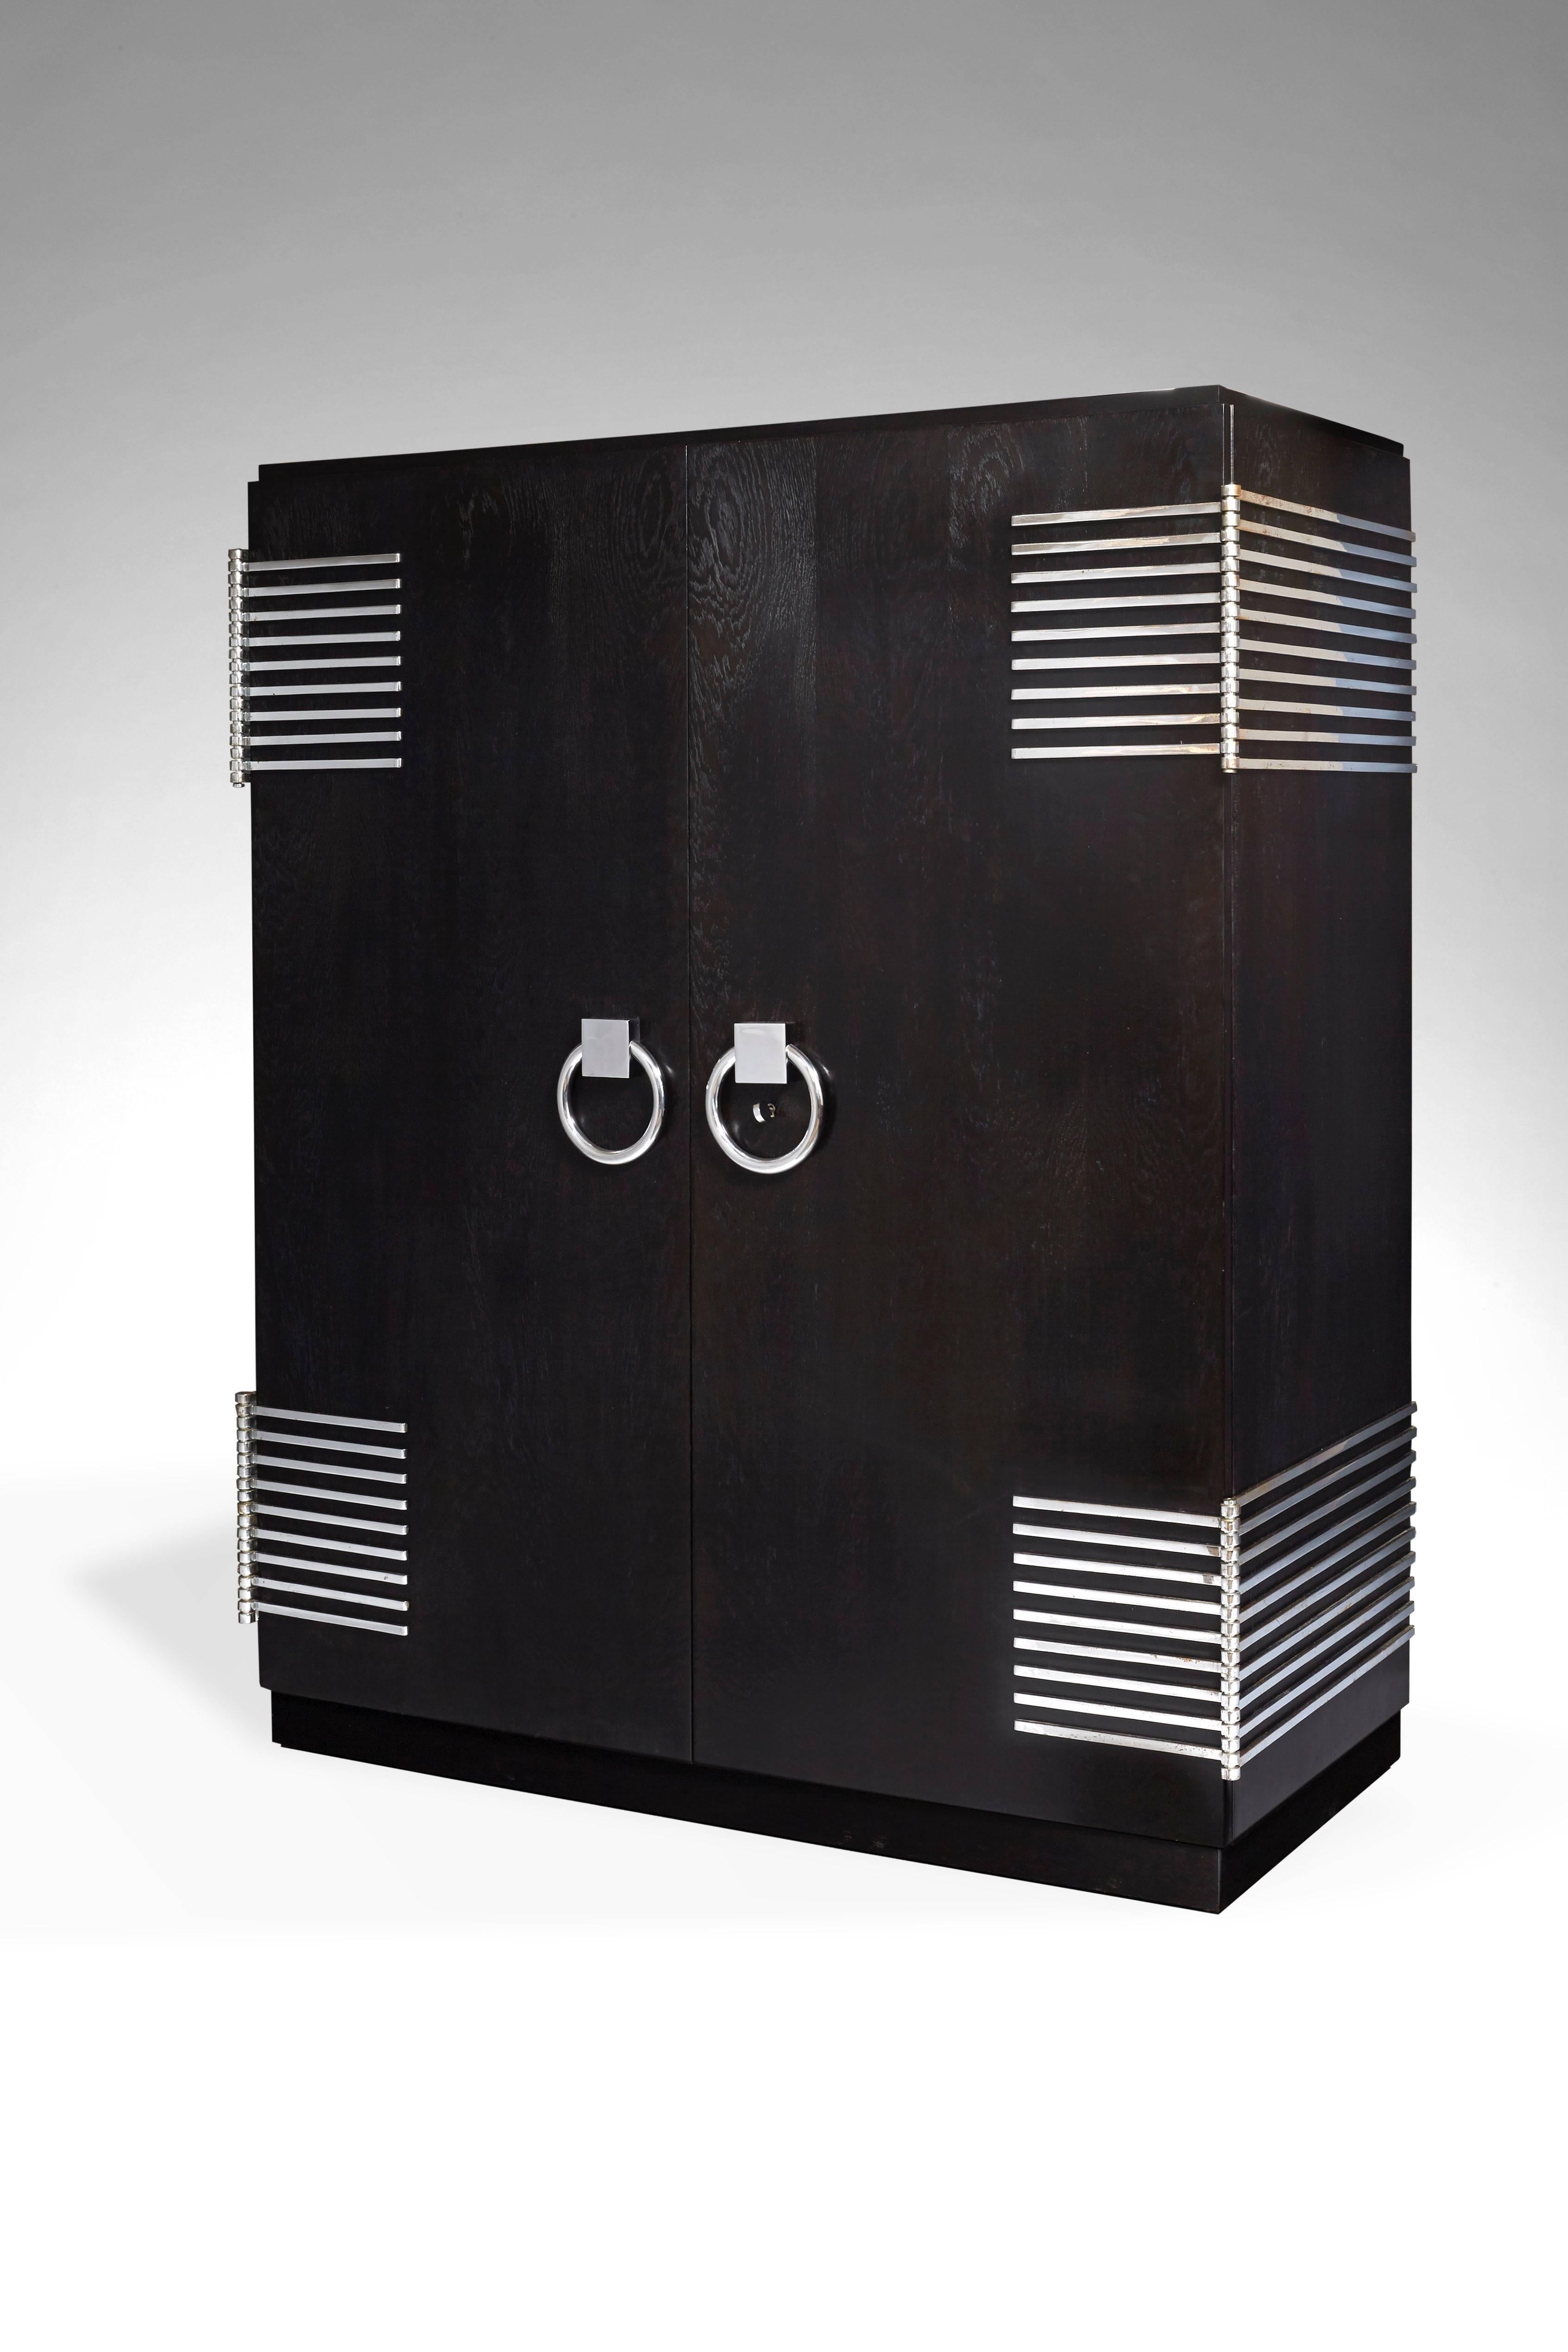 Designed for « La Maison L’Idéal ». Blackened and limed oak, hinges and handles in chromed metal, opening with two doors discovering an oak interior with a wardrobe and four drawers. The metal rod engraved « L’IDEAL ».

- Mobilier et Décoration,